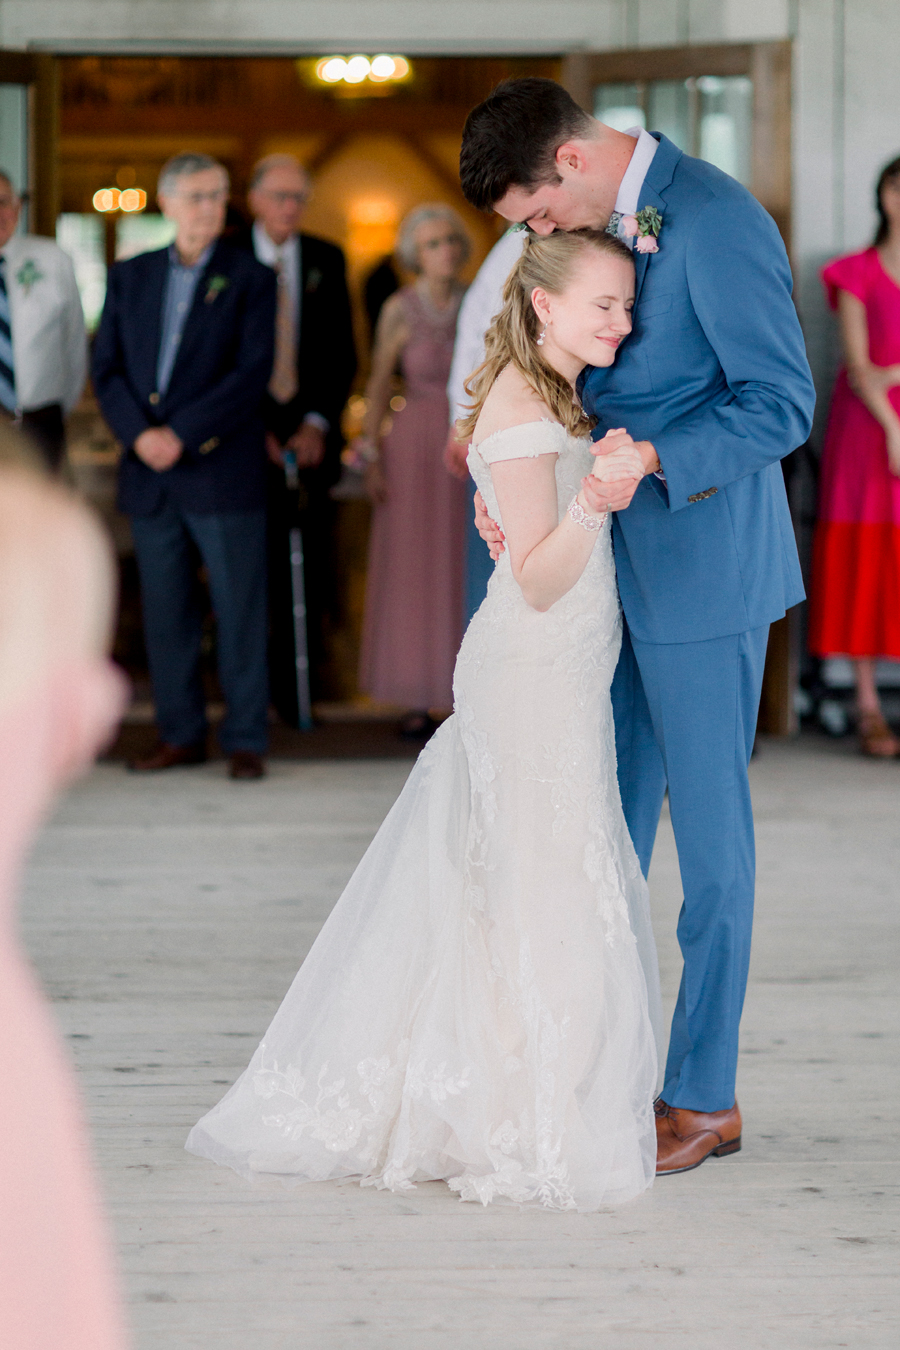 The bride and groom have their first dance at a Blue Bell Farm wedding by Love Tree Studios.